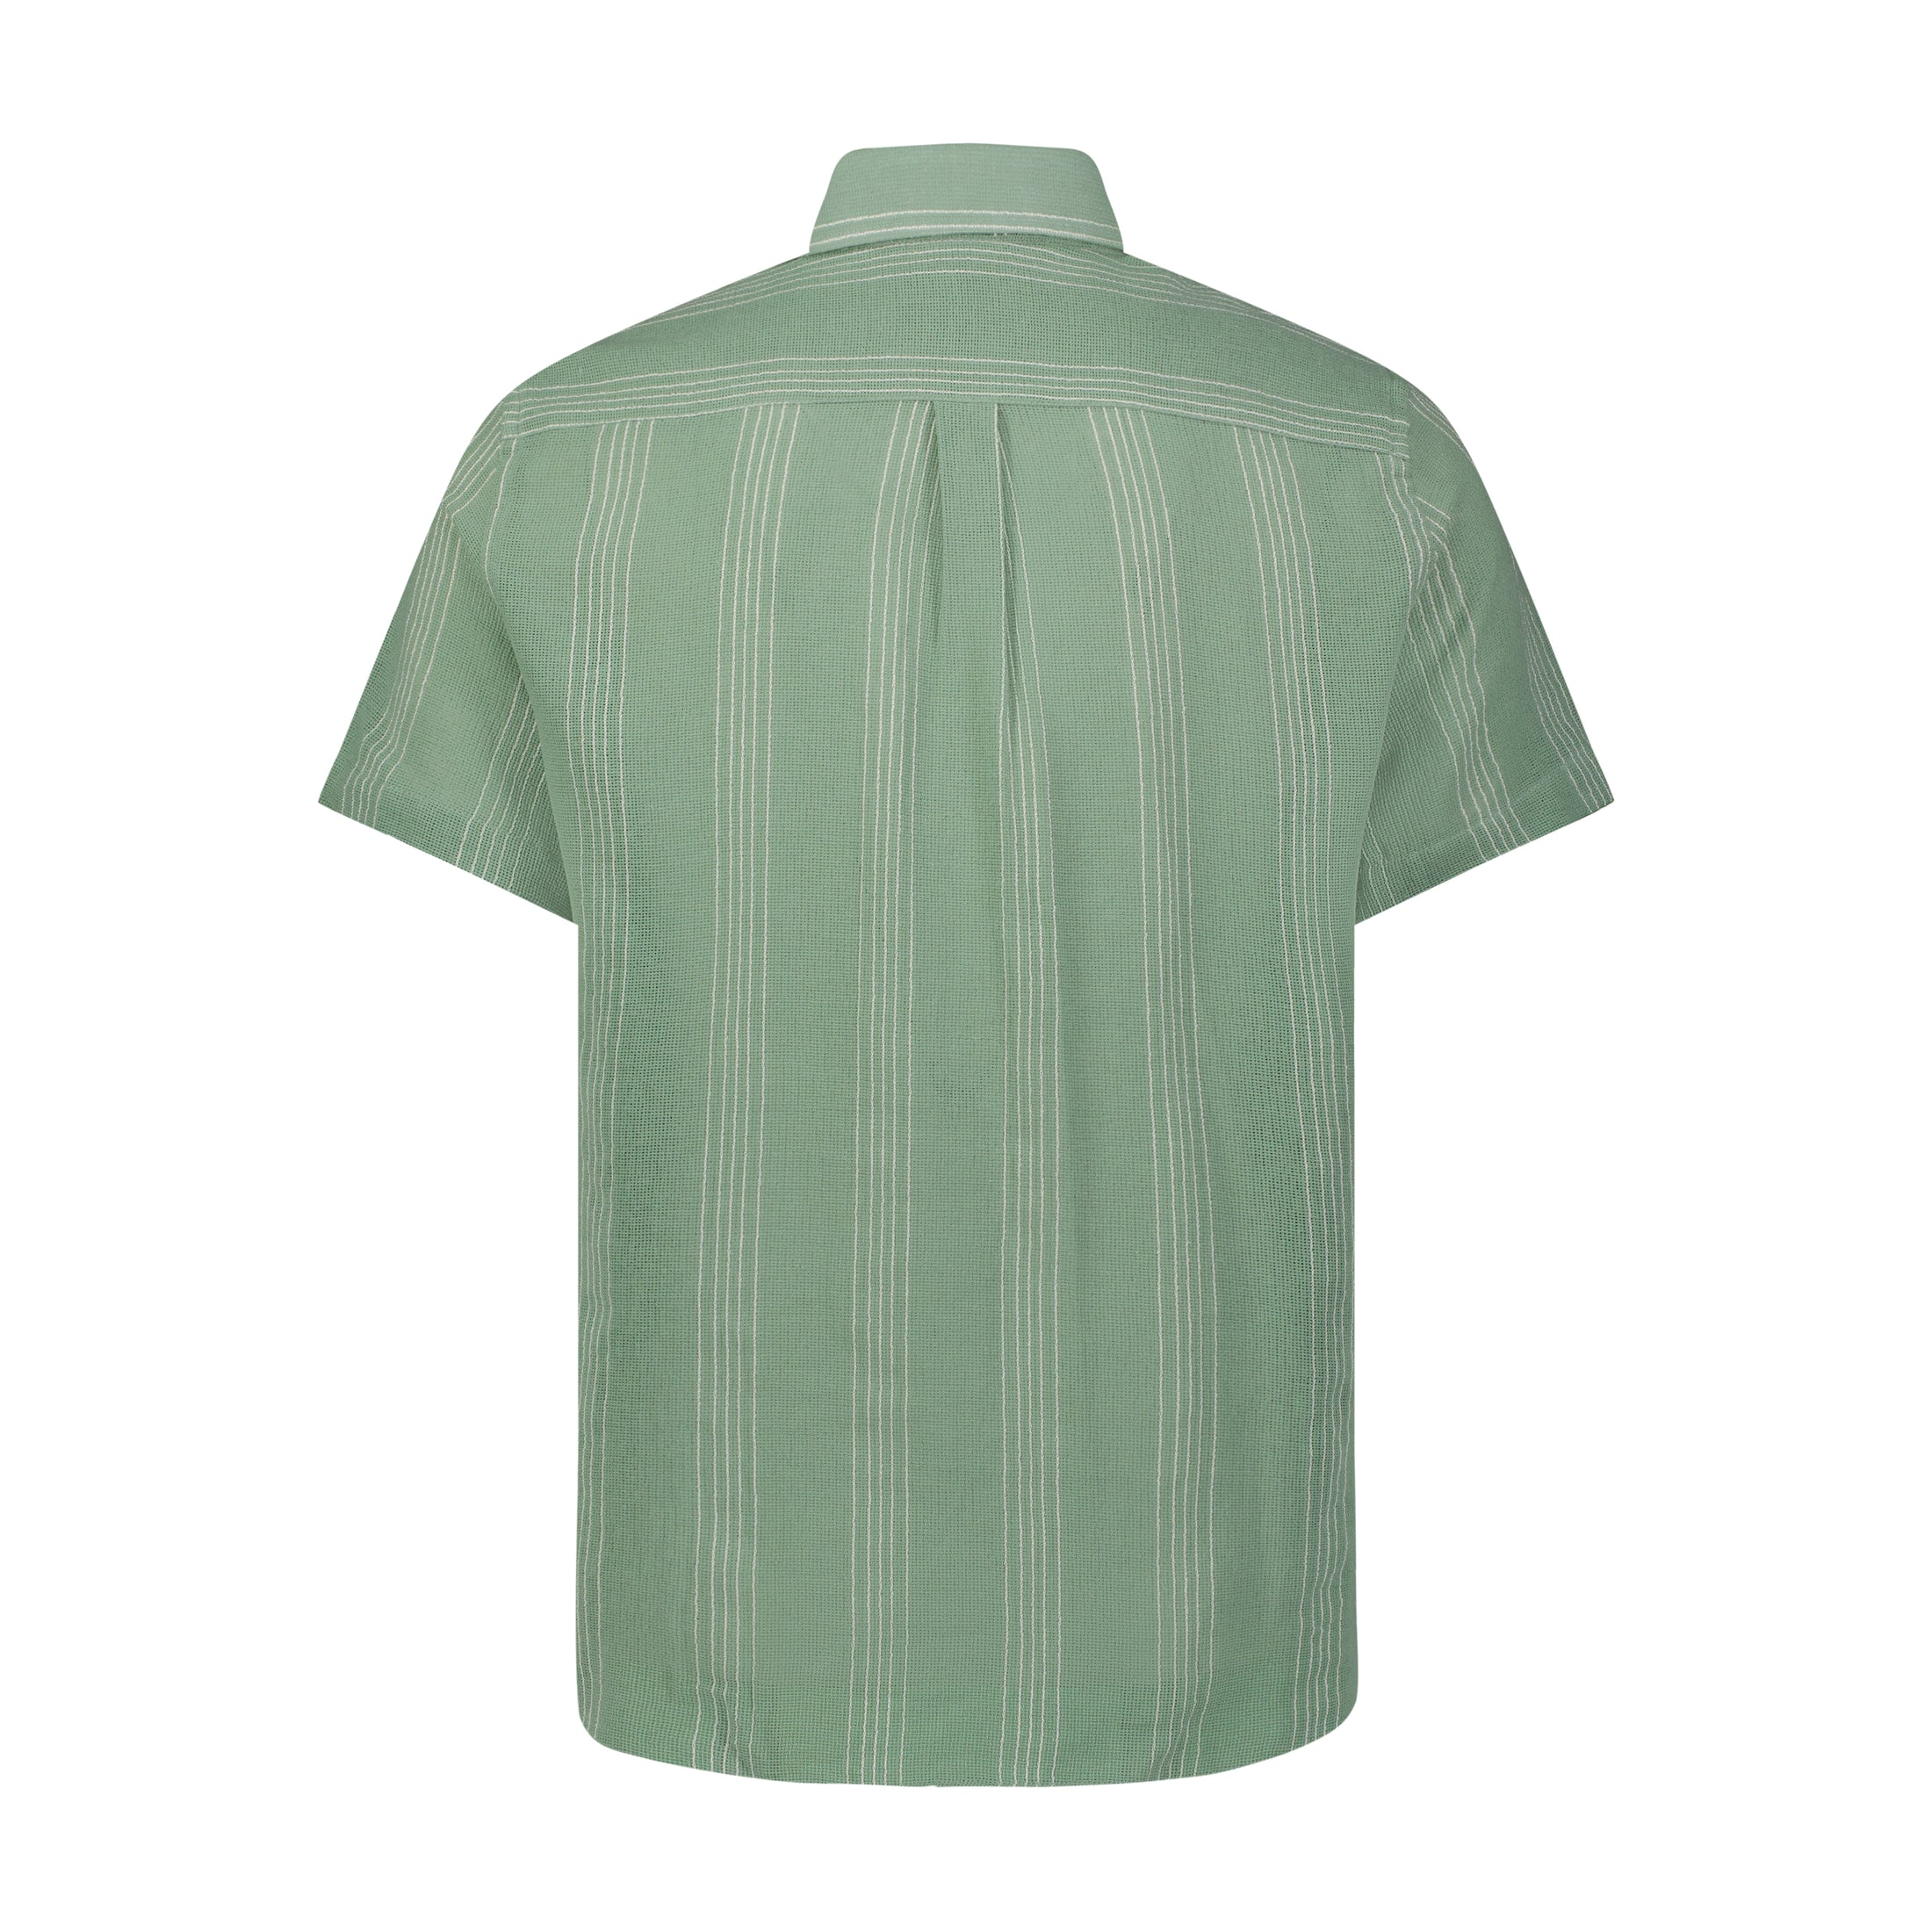 Green with White Embroidered Striped Short Sleeve Shirt